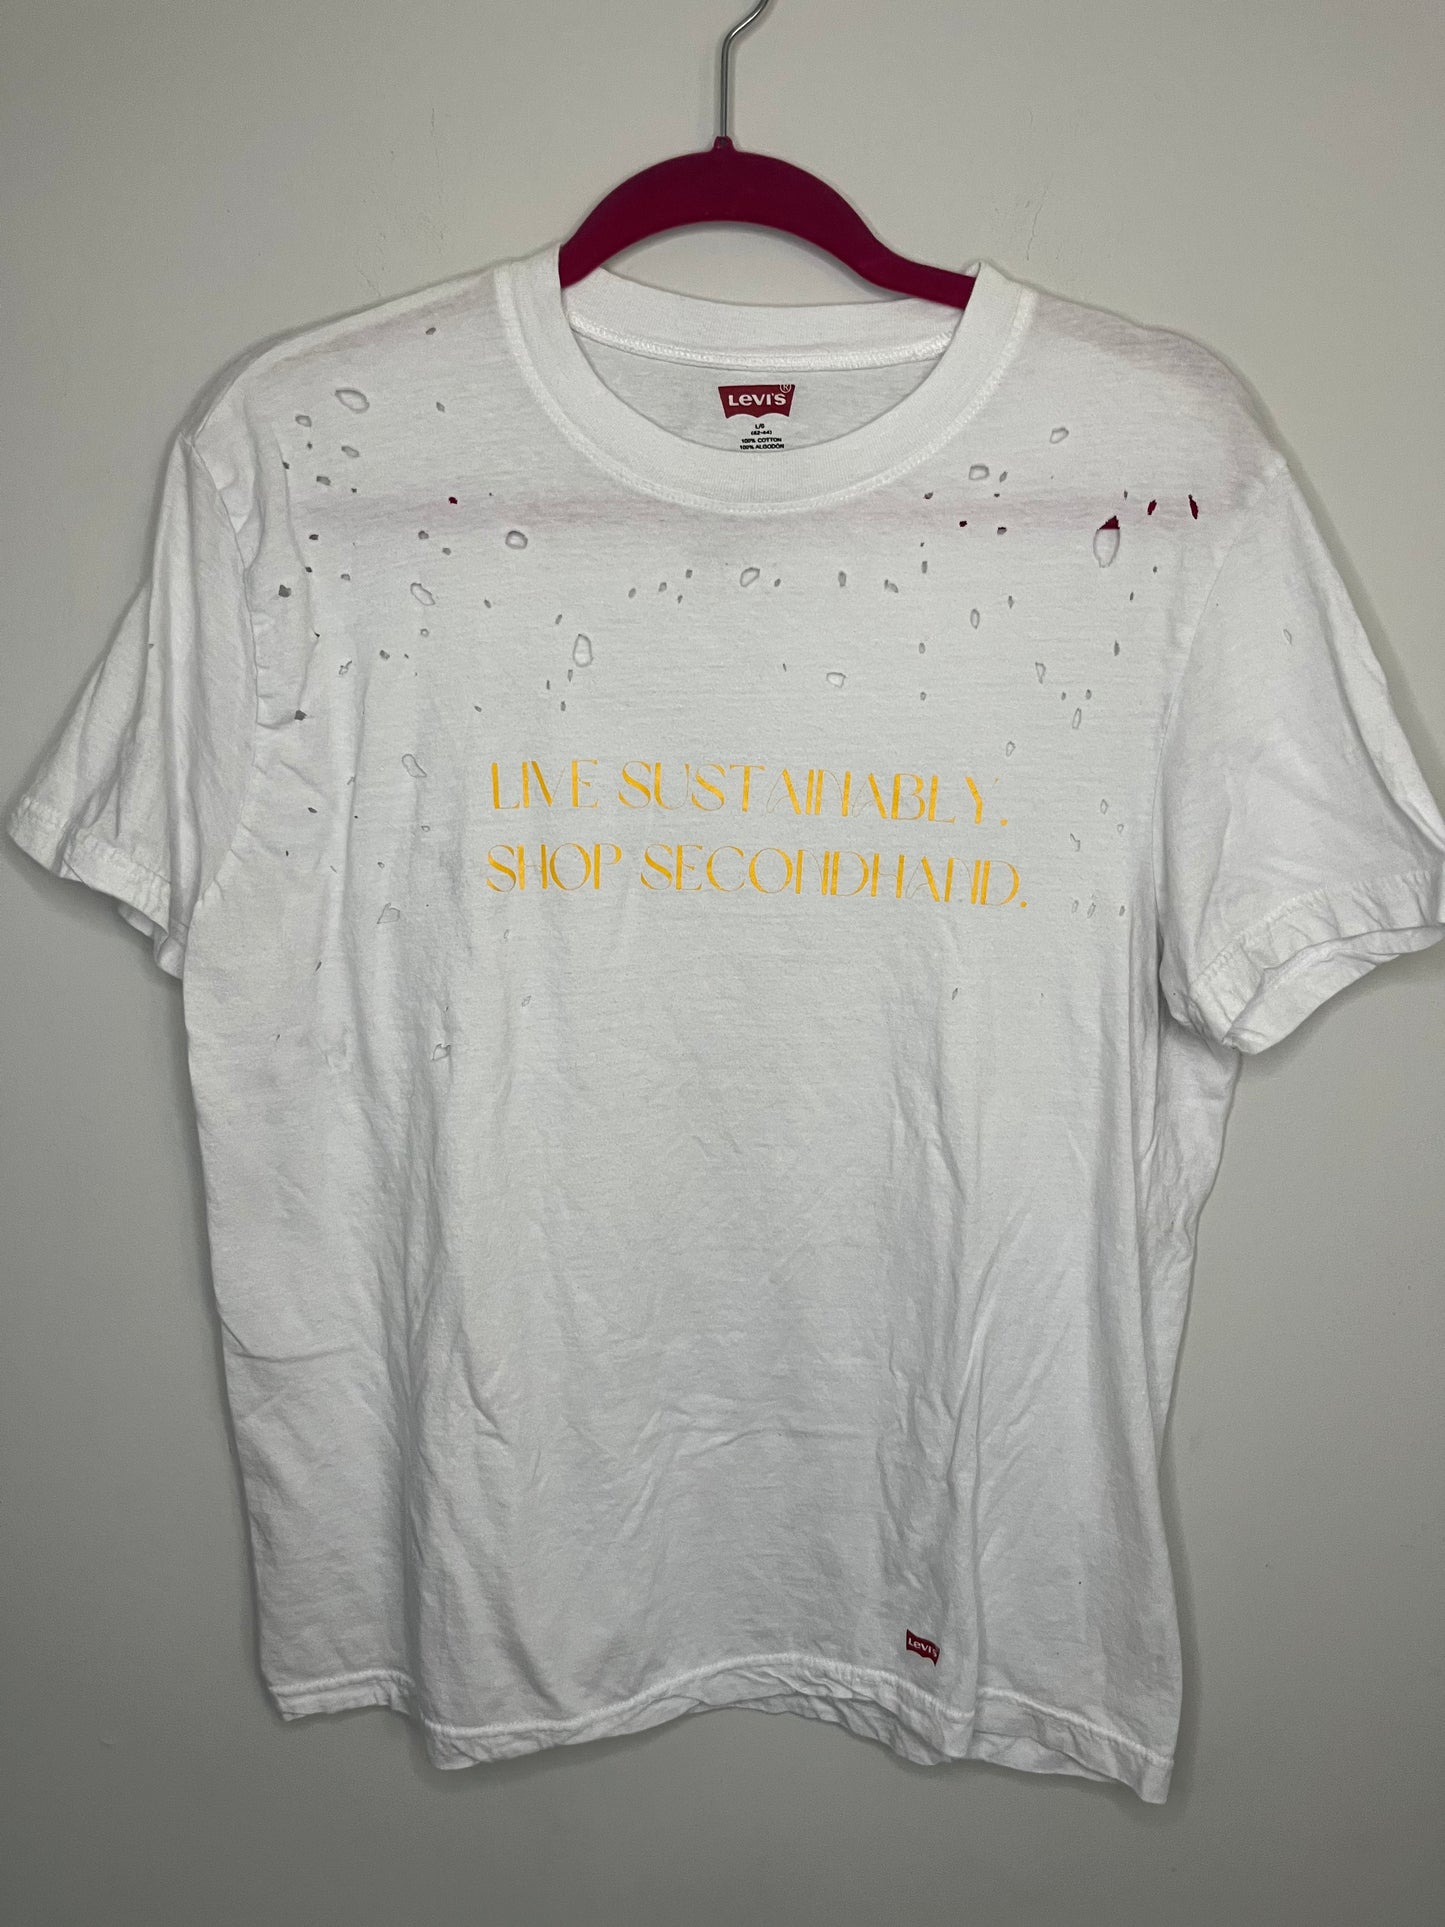 White Live Sustainably Shop Secondhand Levi's Tee w/ Holes | Size L